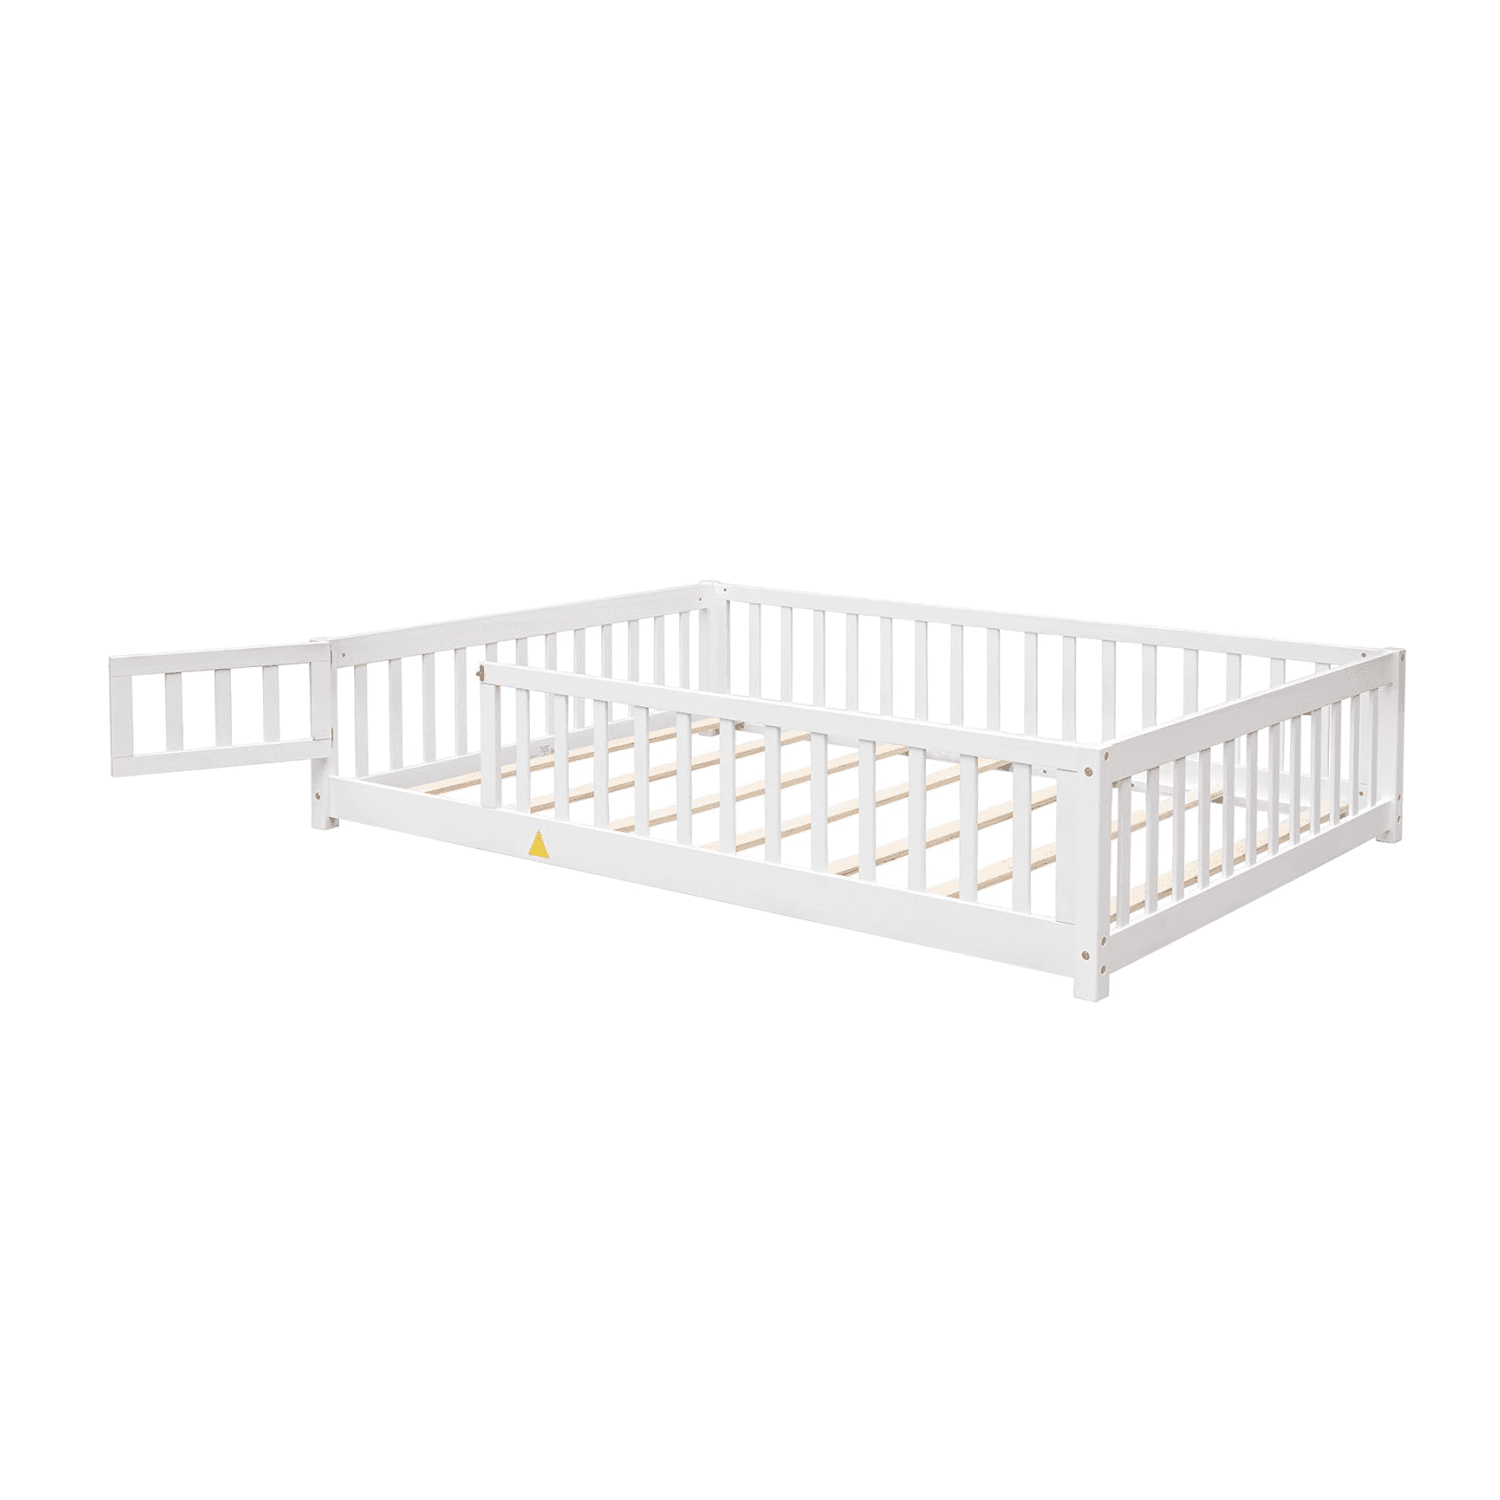 Montessori Bellemave Full Size Floor Bed Frame With Fence Railings & Slats